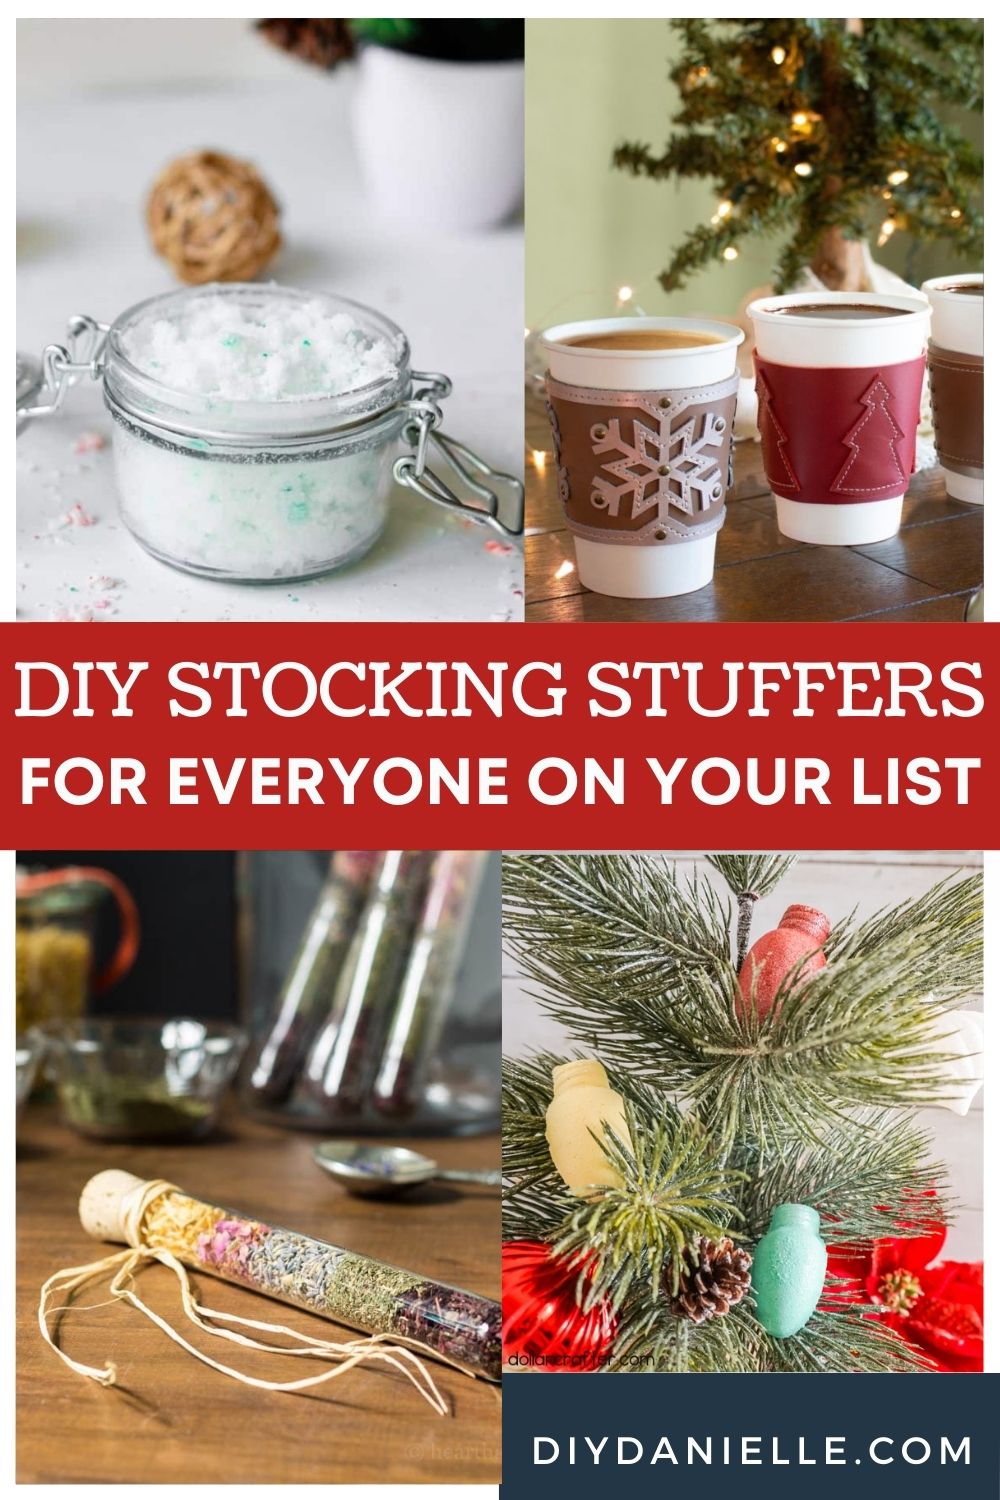 diy stocking stuffers pin collage with text overlay